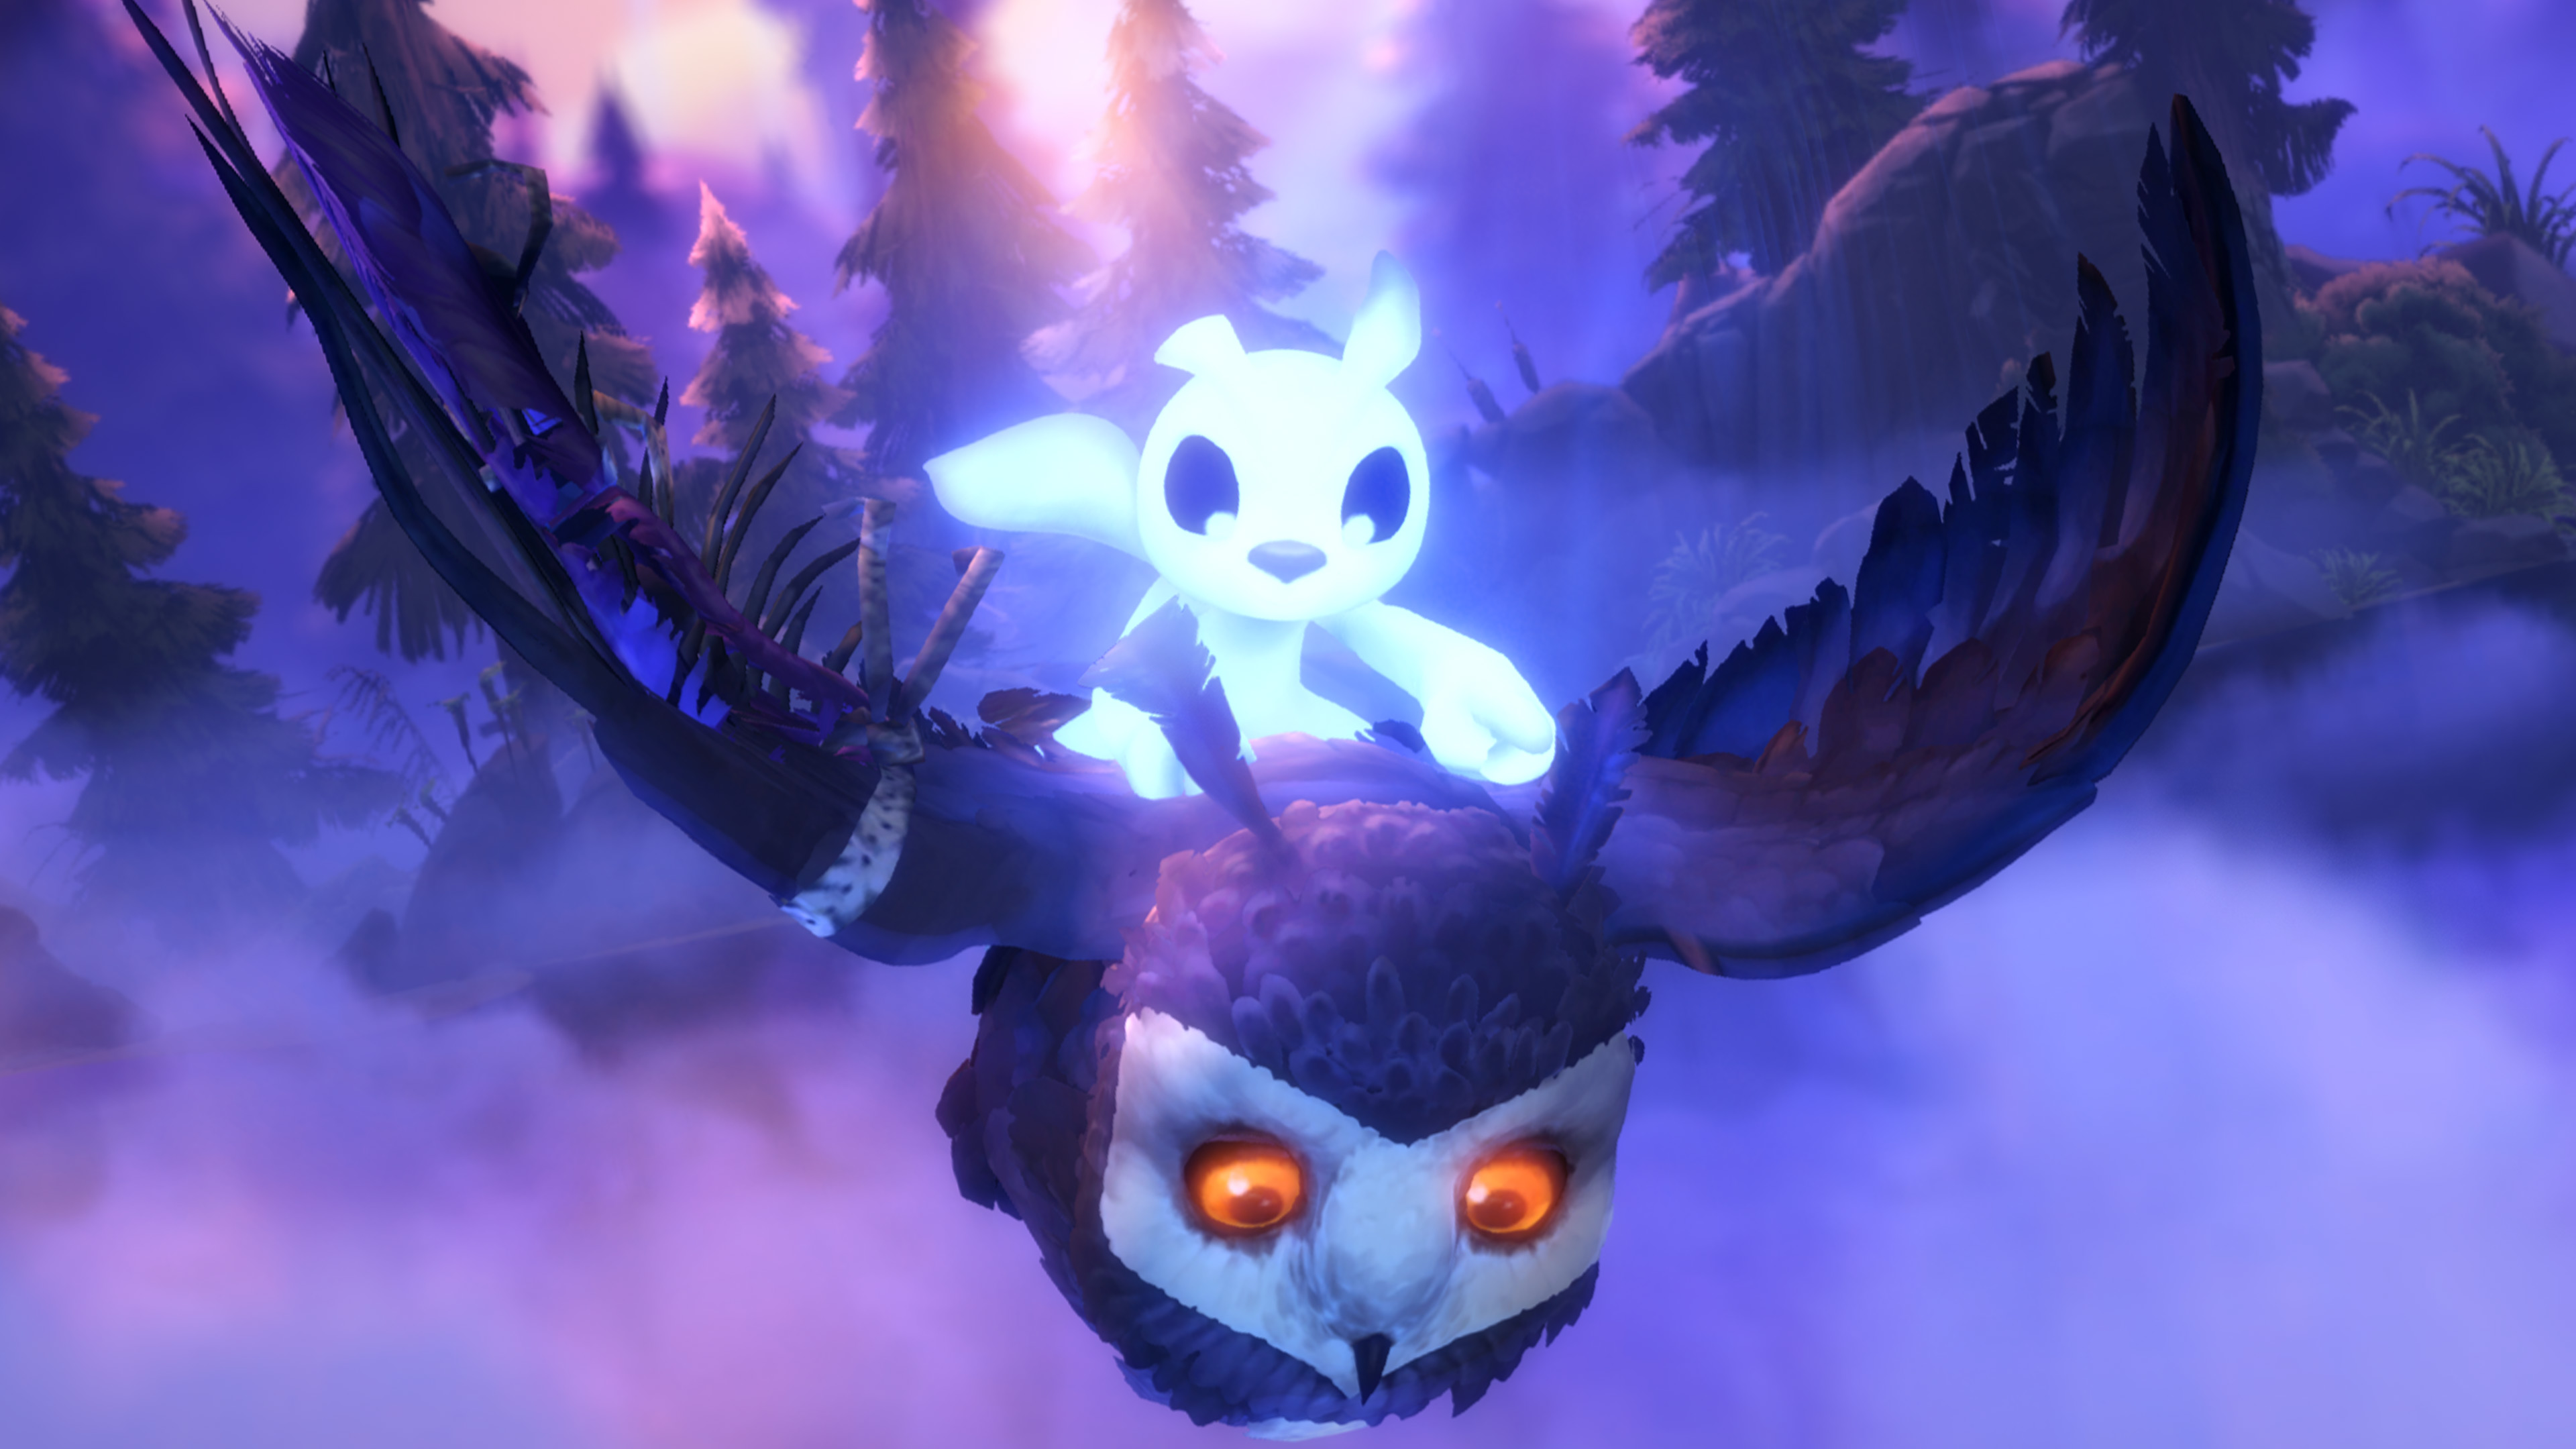 ori and the will of the wisps soundtrack